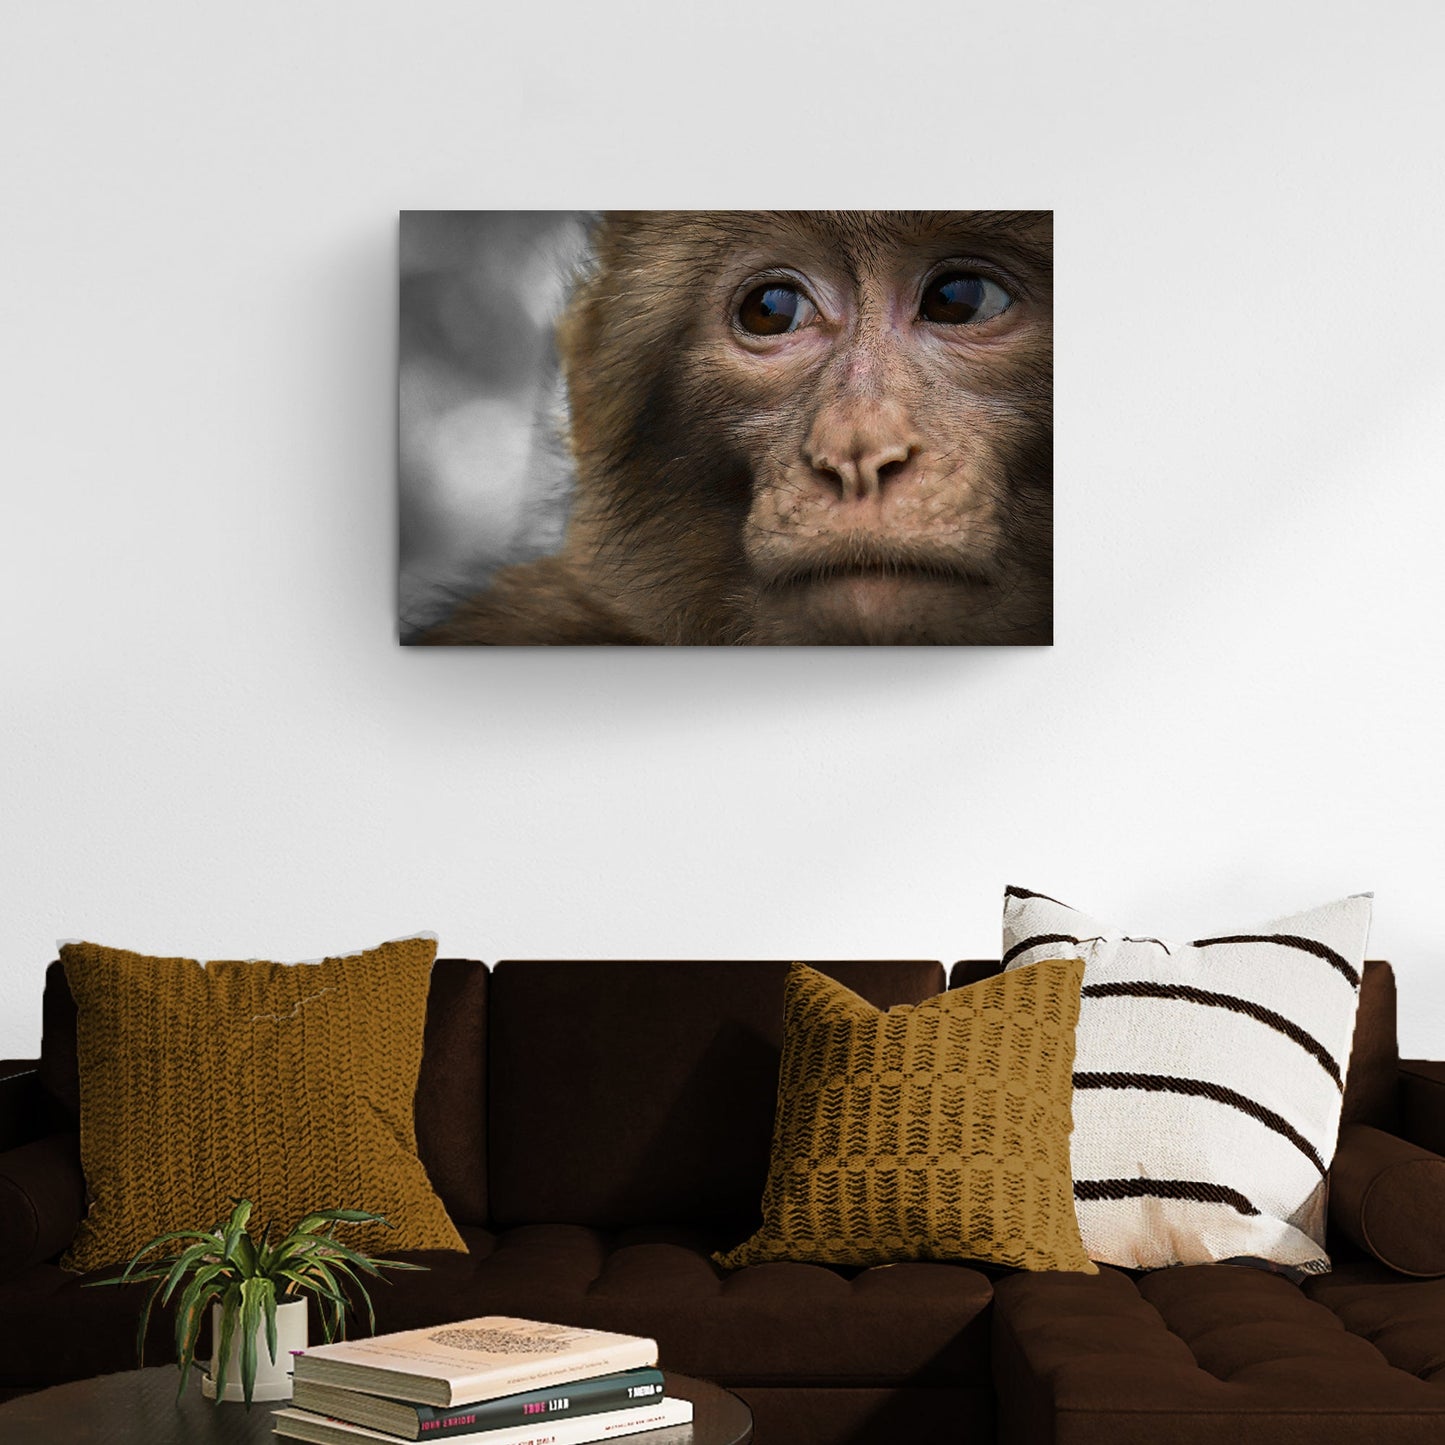 Monkey Portrait Canvas Wall Art with Character